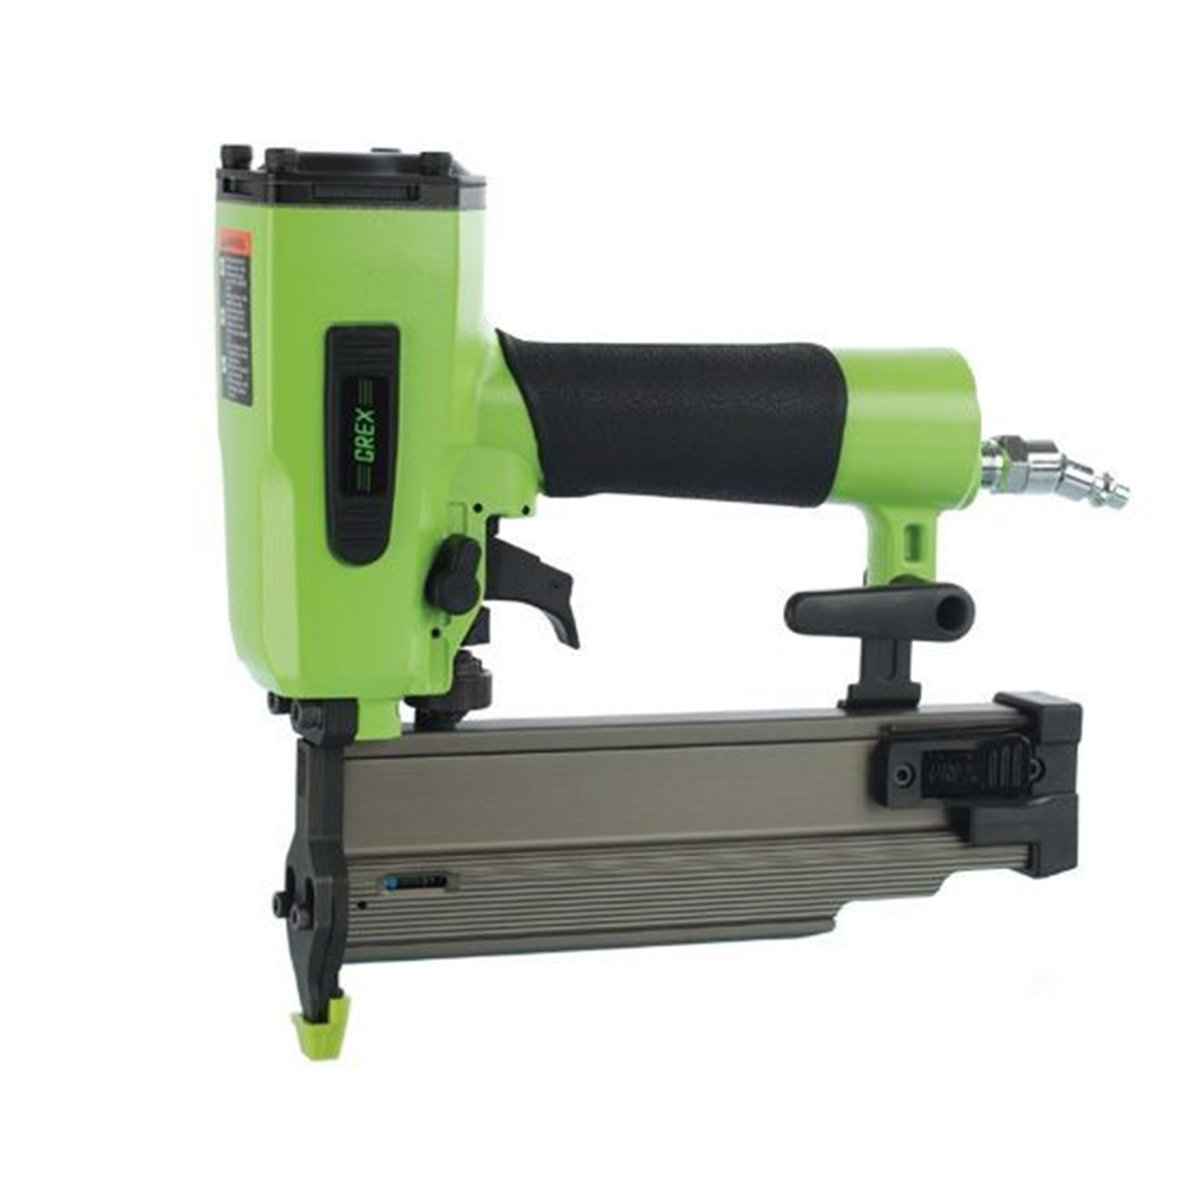 Left side view of Grex 1850GB 18 gauge brad nailer showing fire selection switch, nose safety with cap, belt hook, coupler.